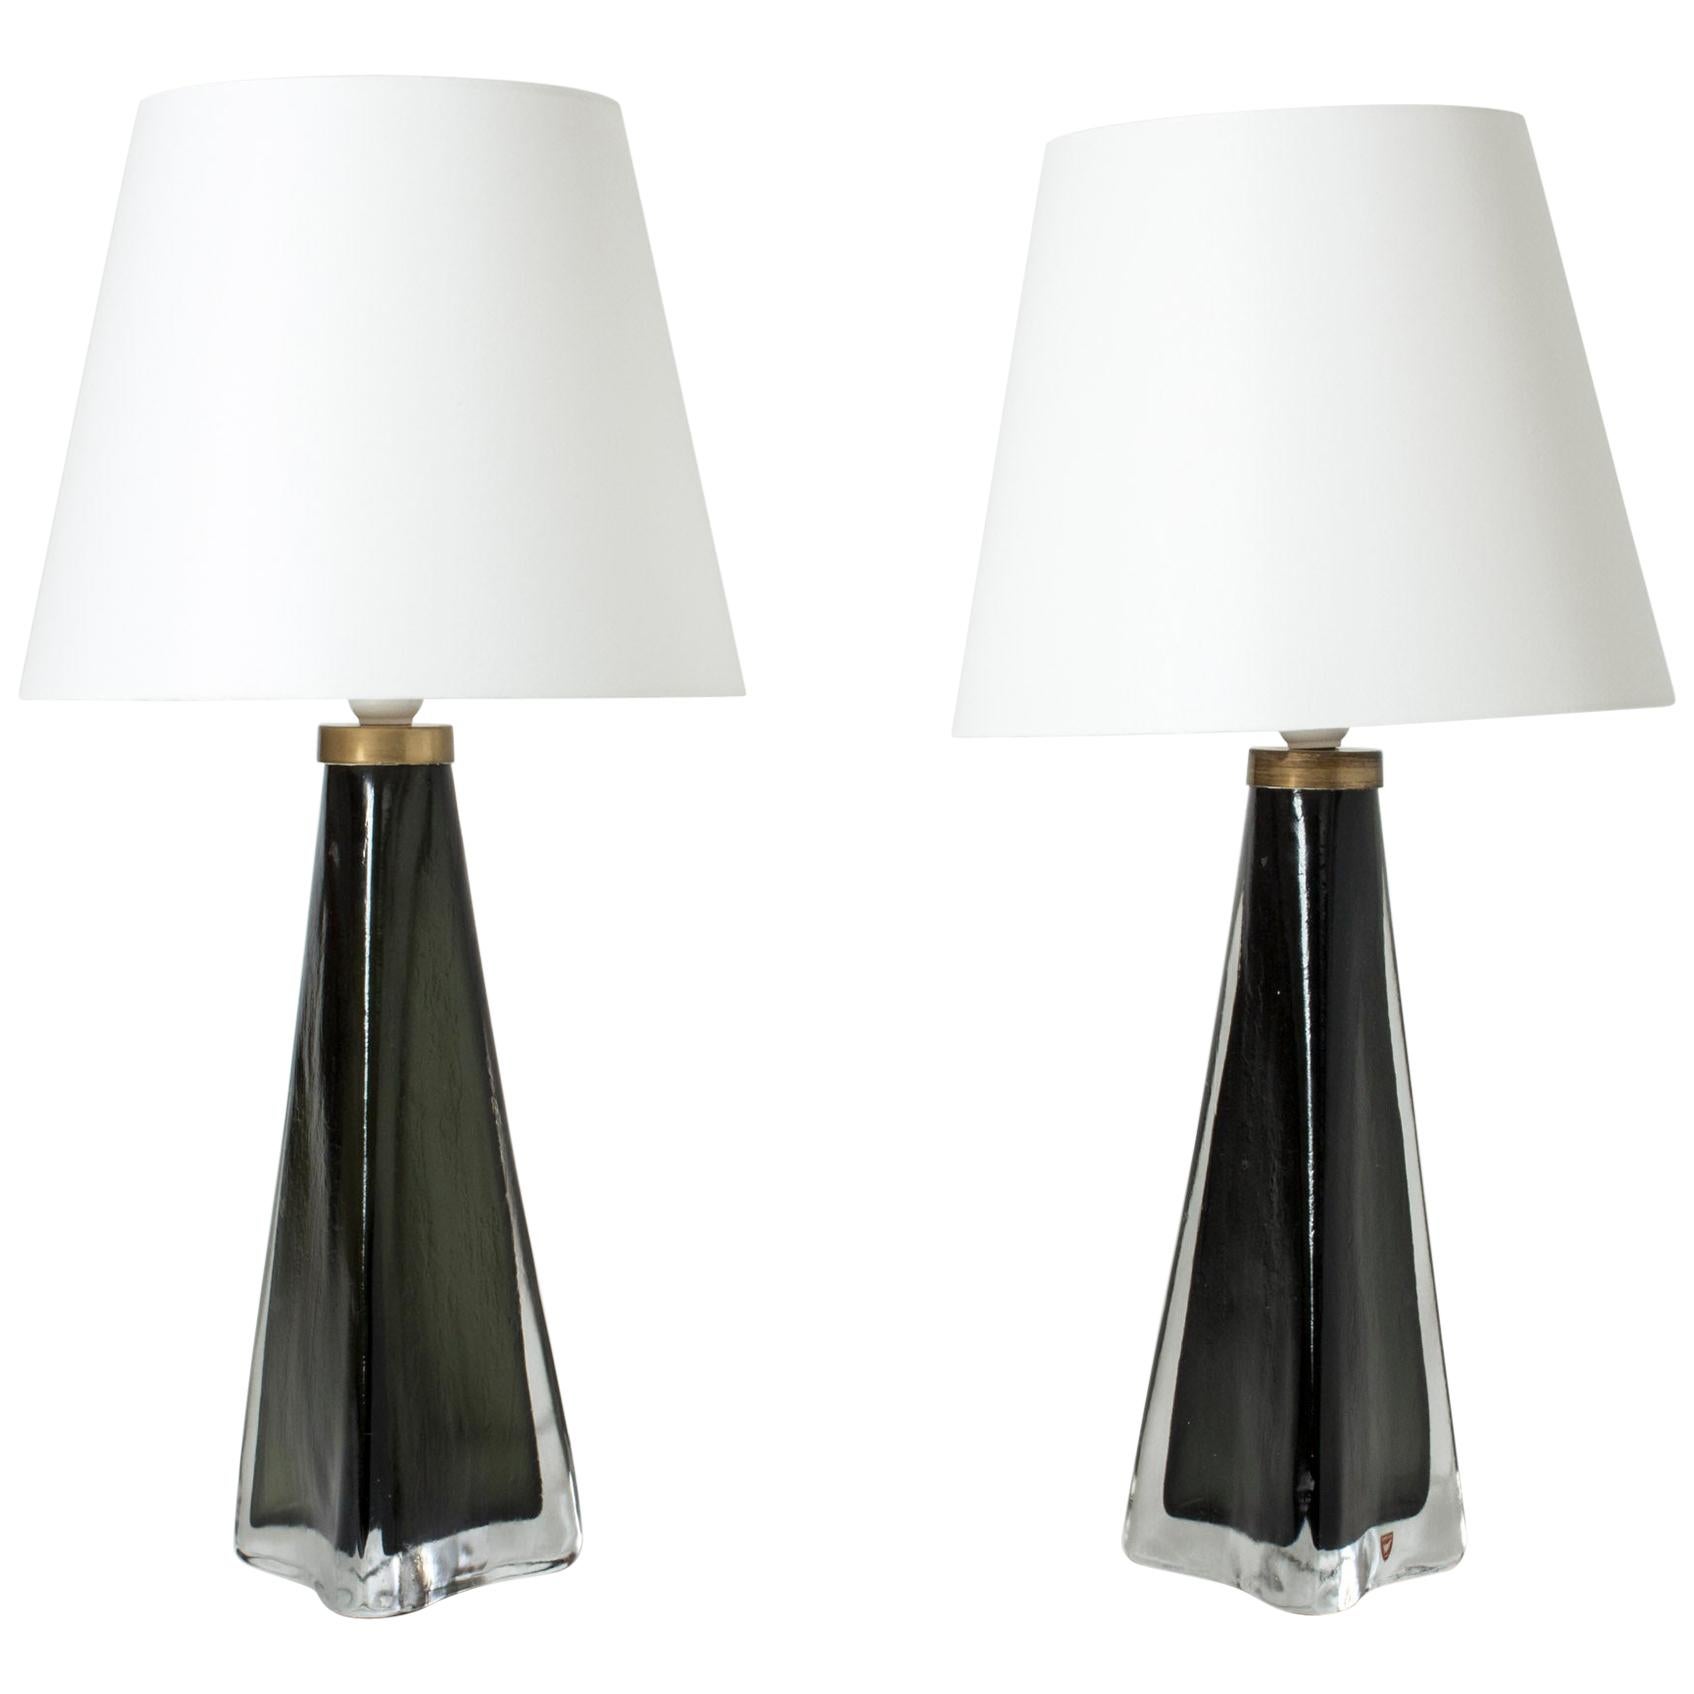 Pair of Glass Table Lamps by Carl Fagerlund